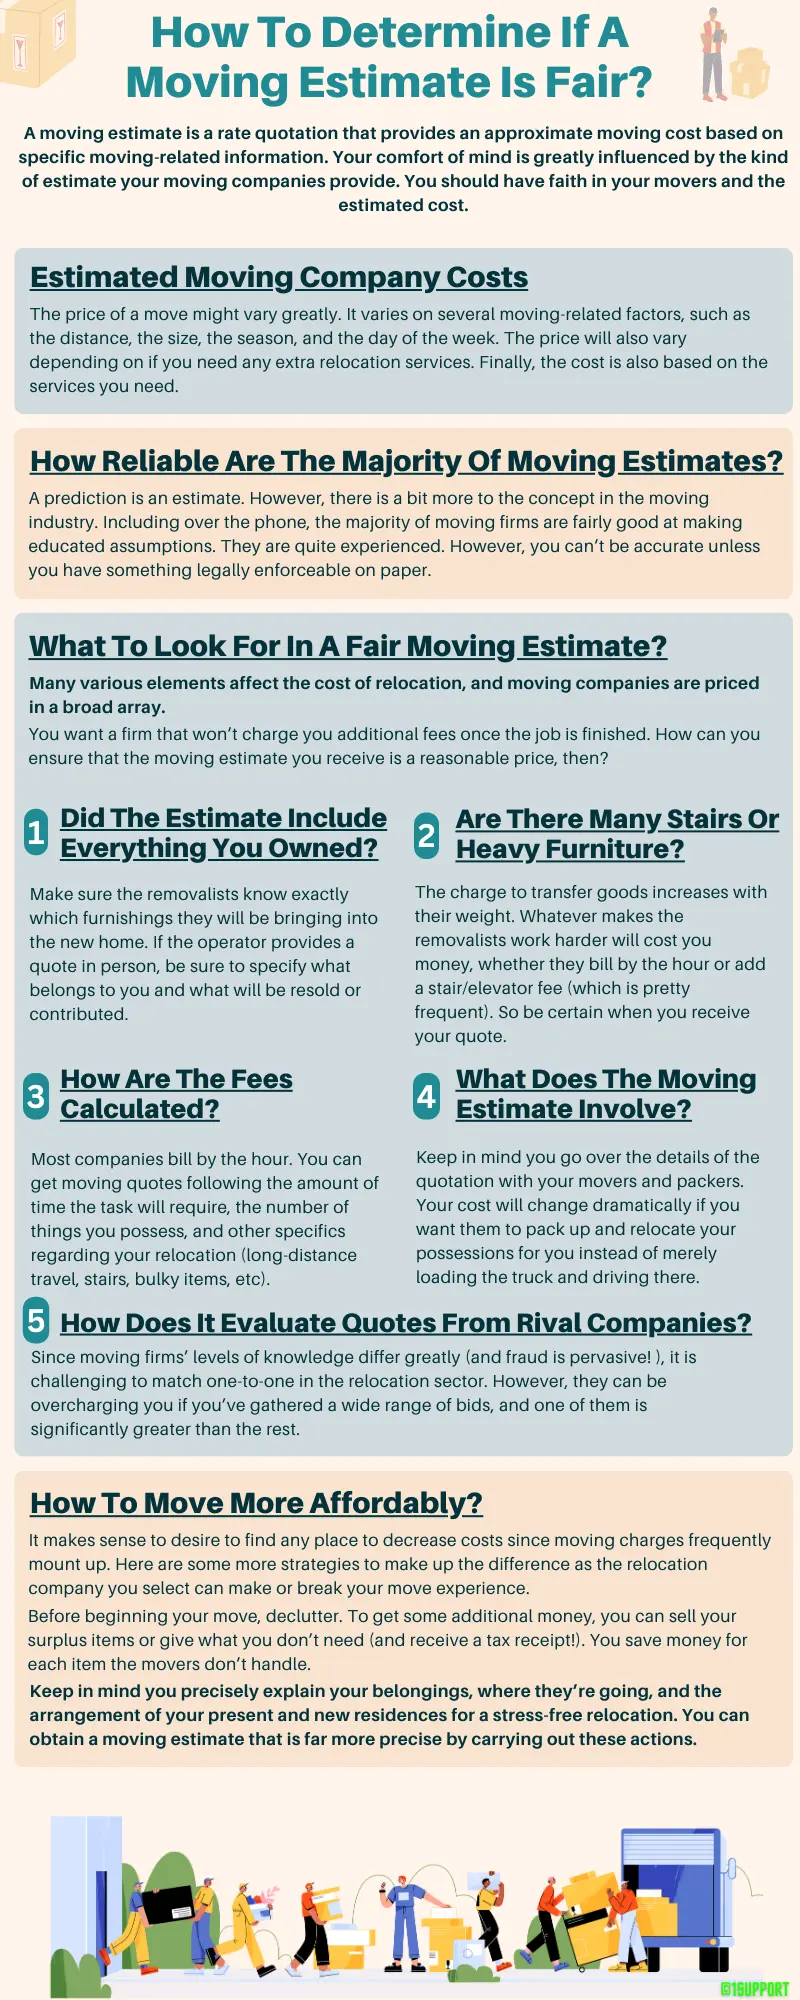 How To Determine If A Moving Estimate Is Fair Informational Infographic